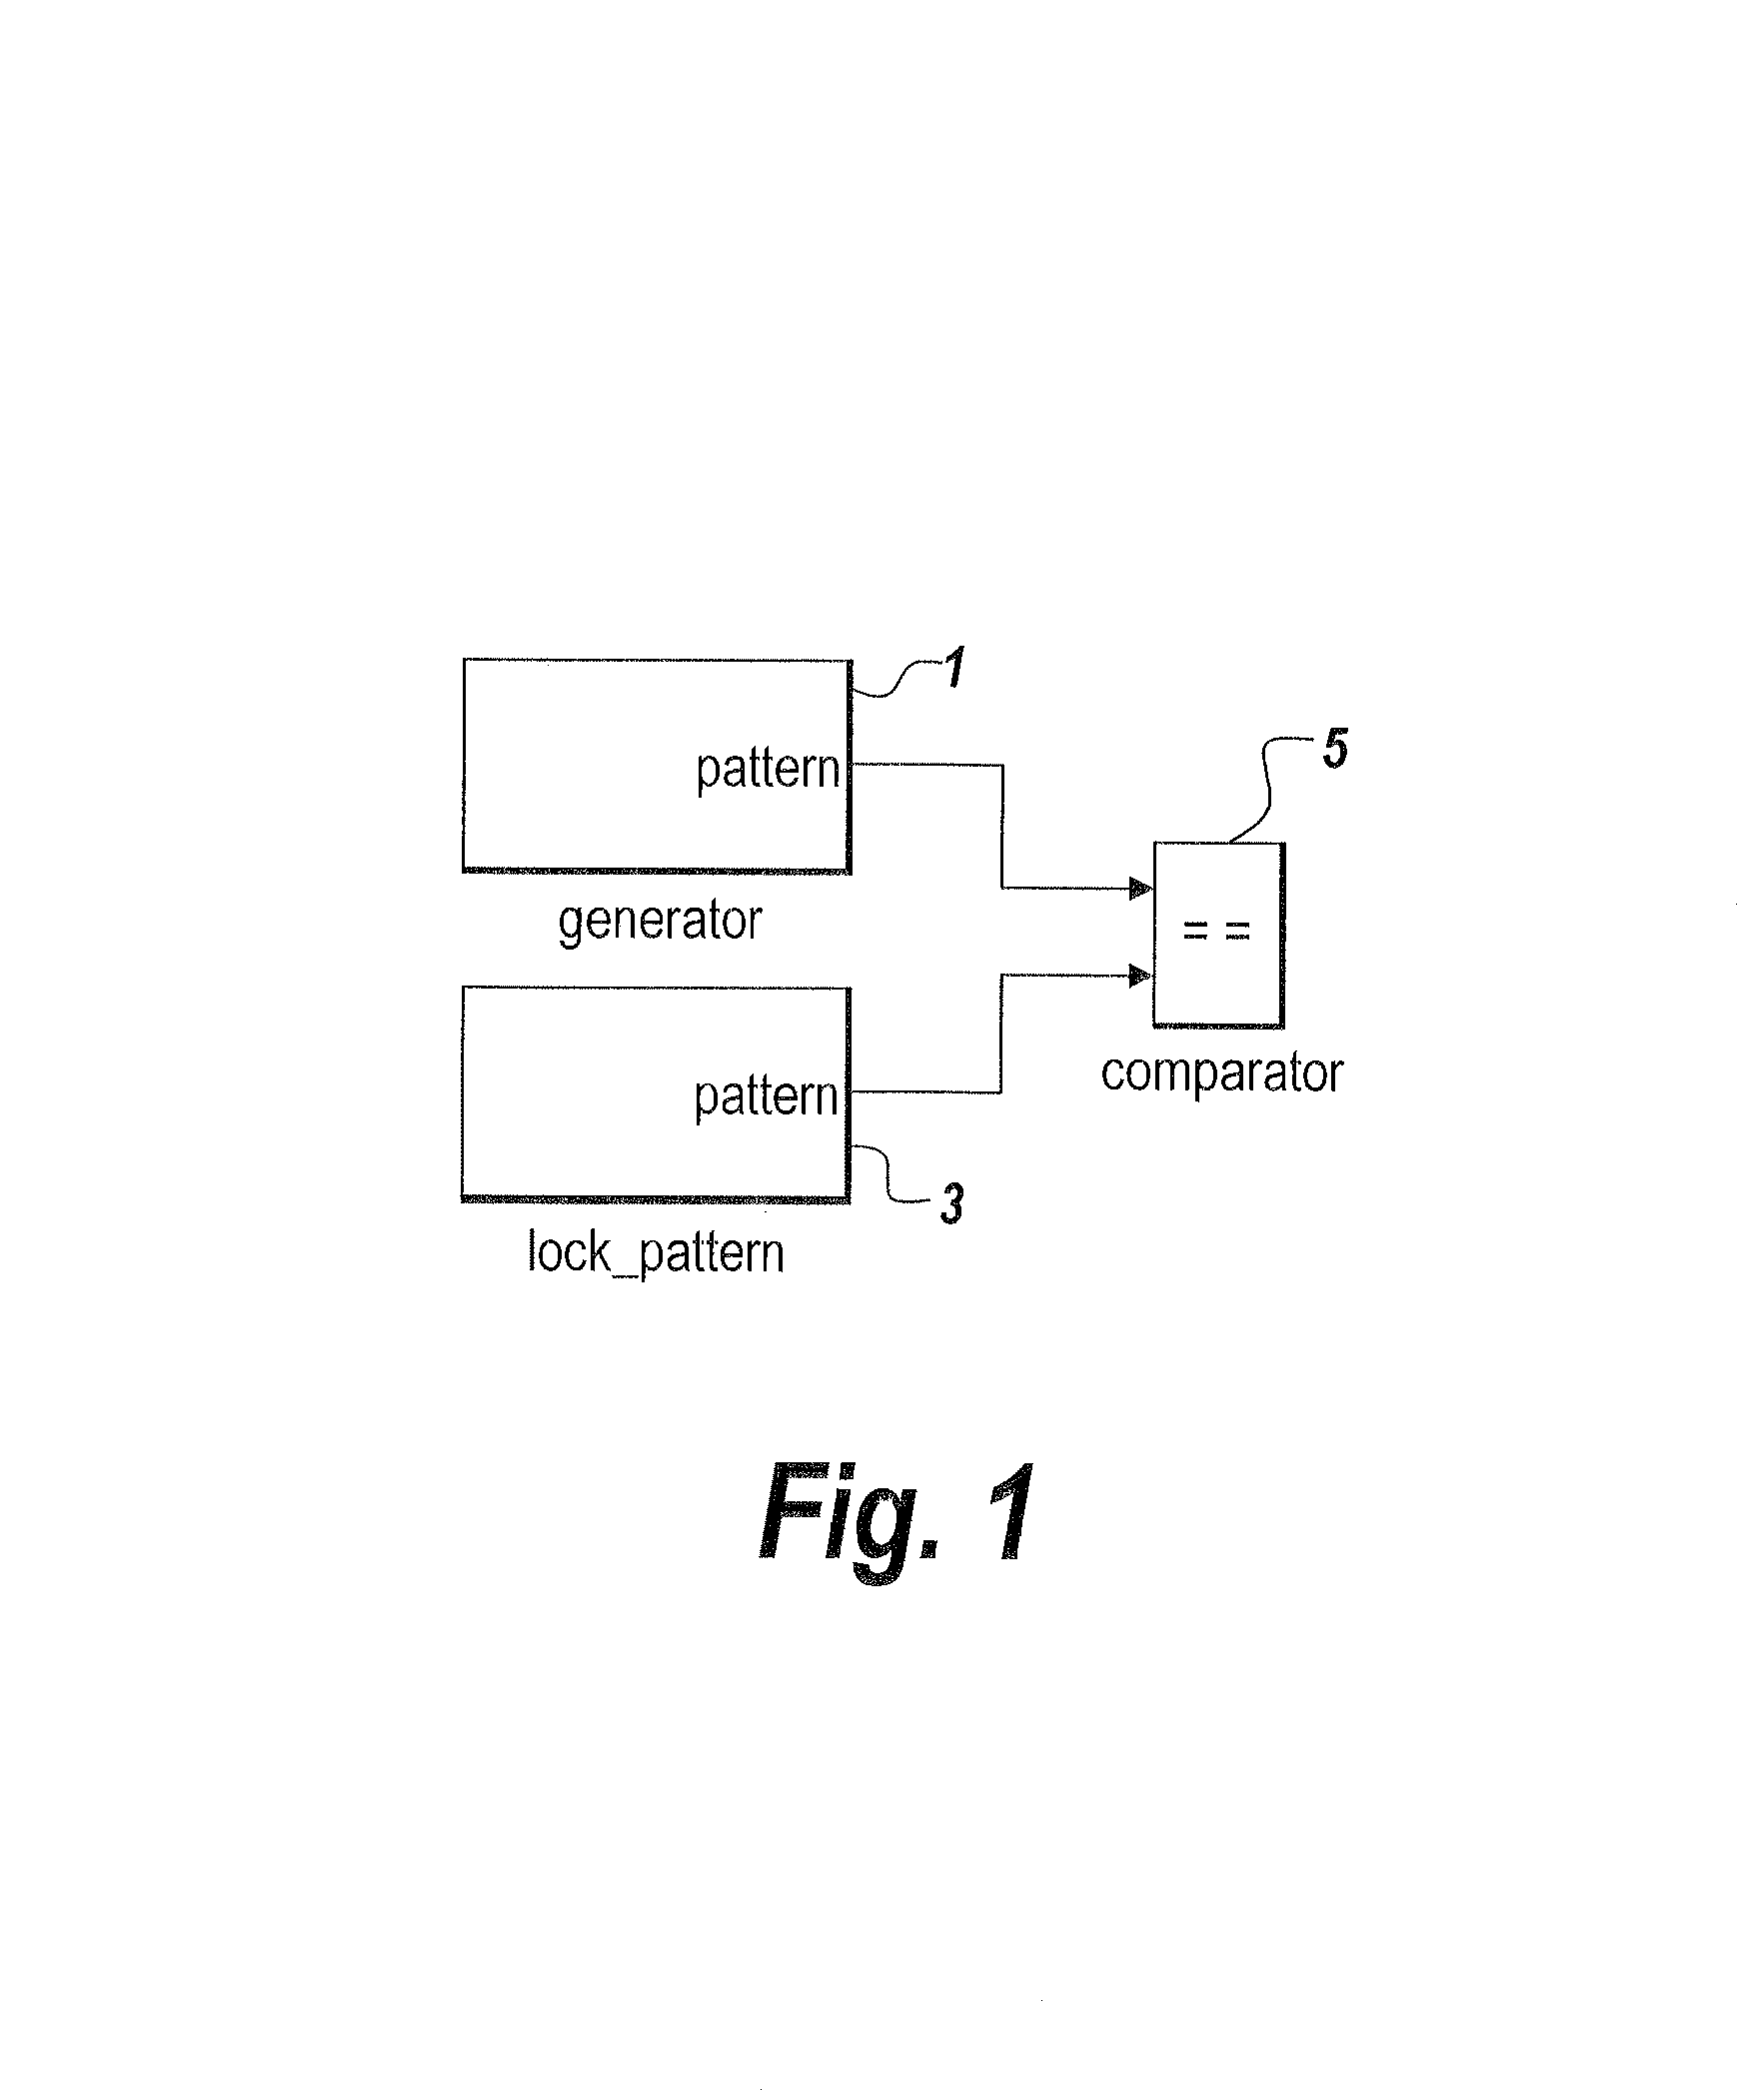 Method for using a graphical debugging tool